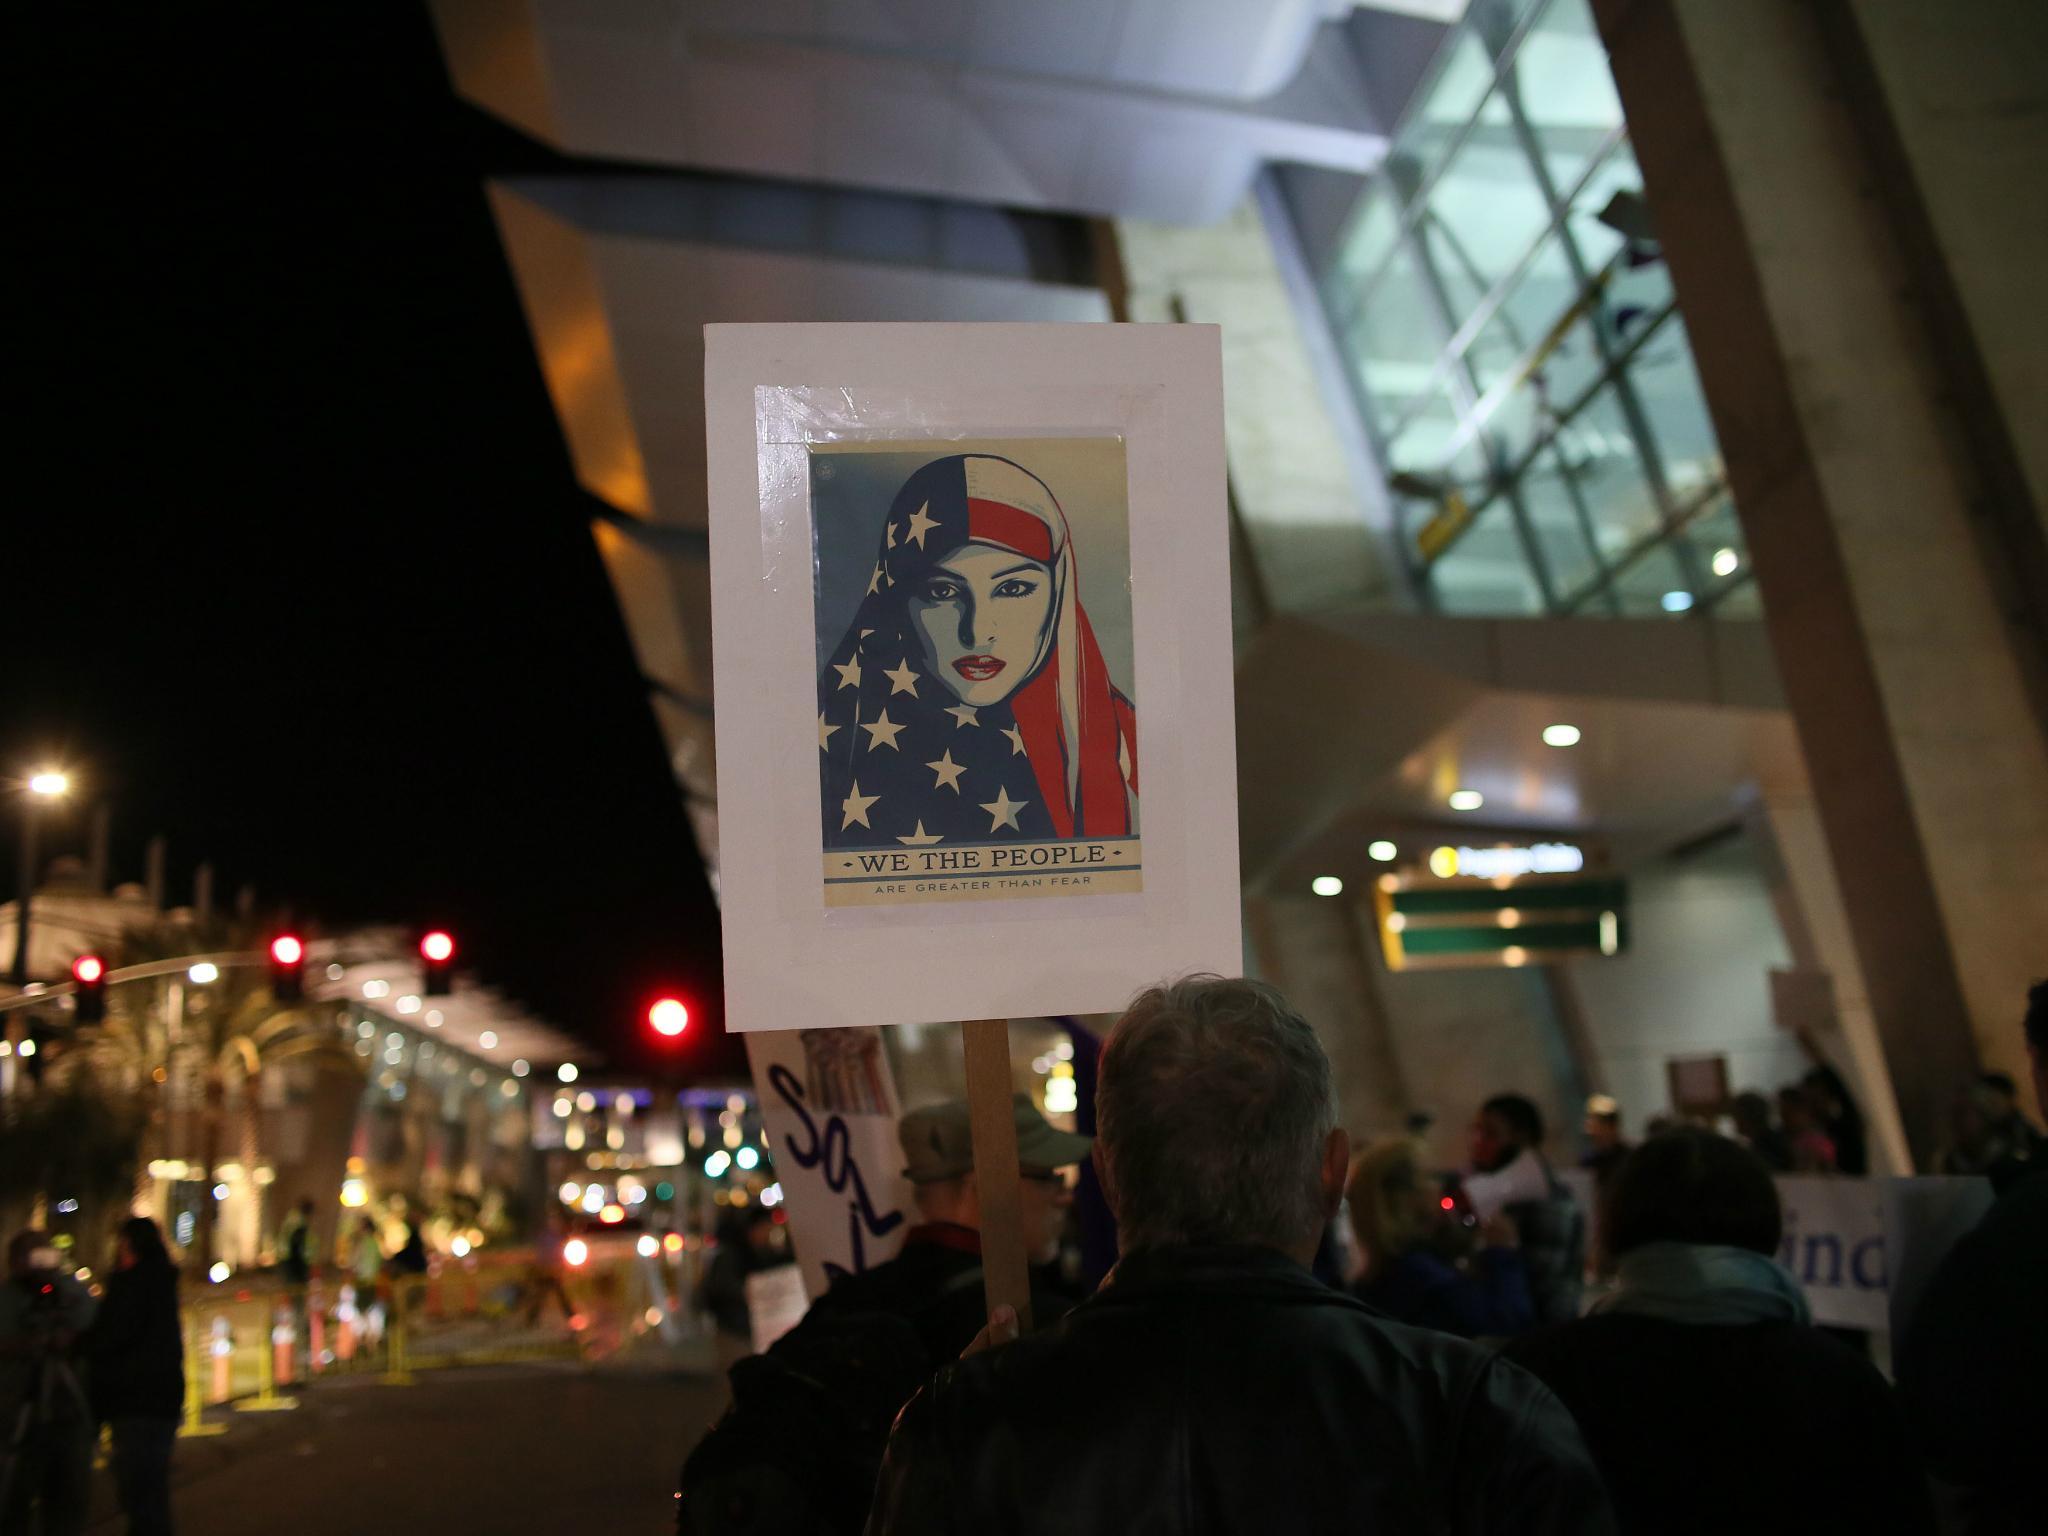 A protestor holds a sign at the airport in San Diego, California opposing Donald Trump's travel ban in January 2017